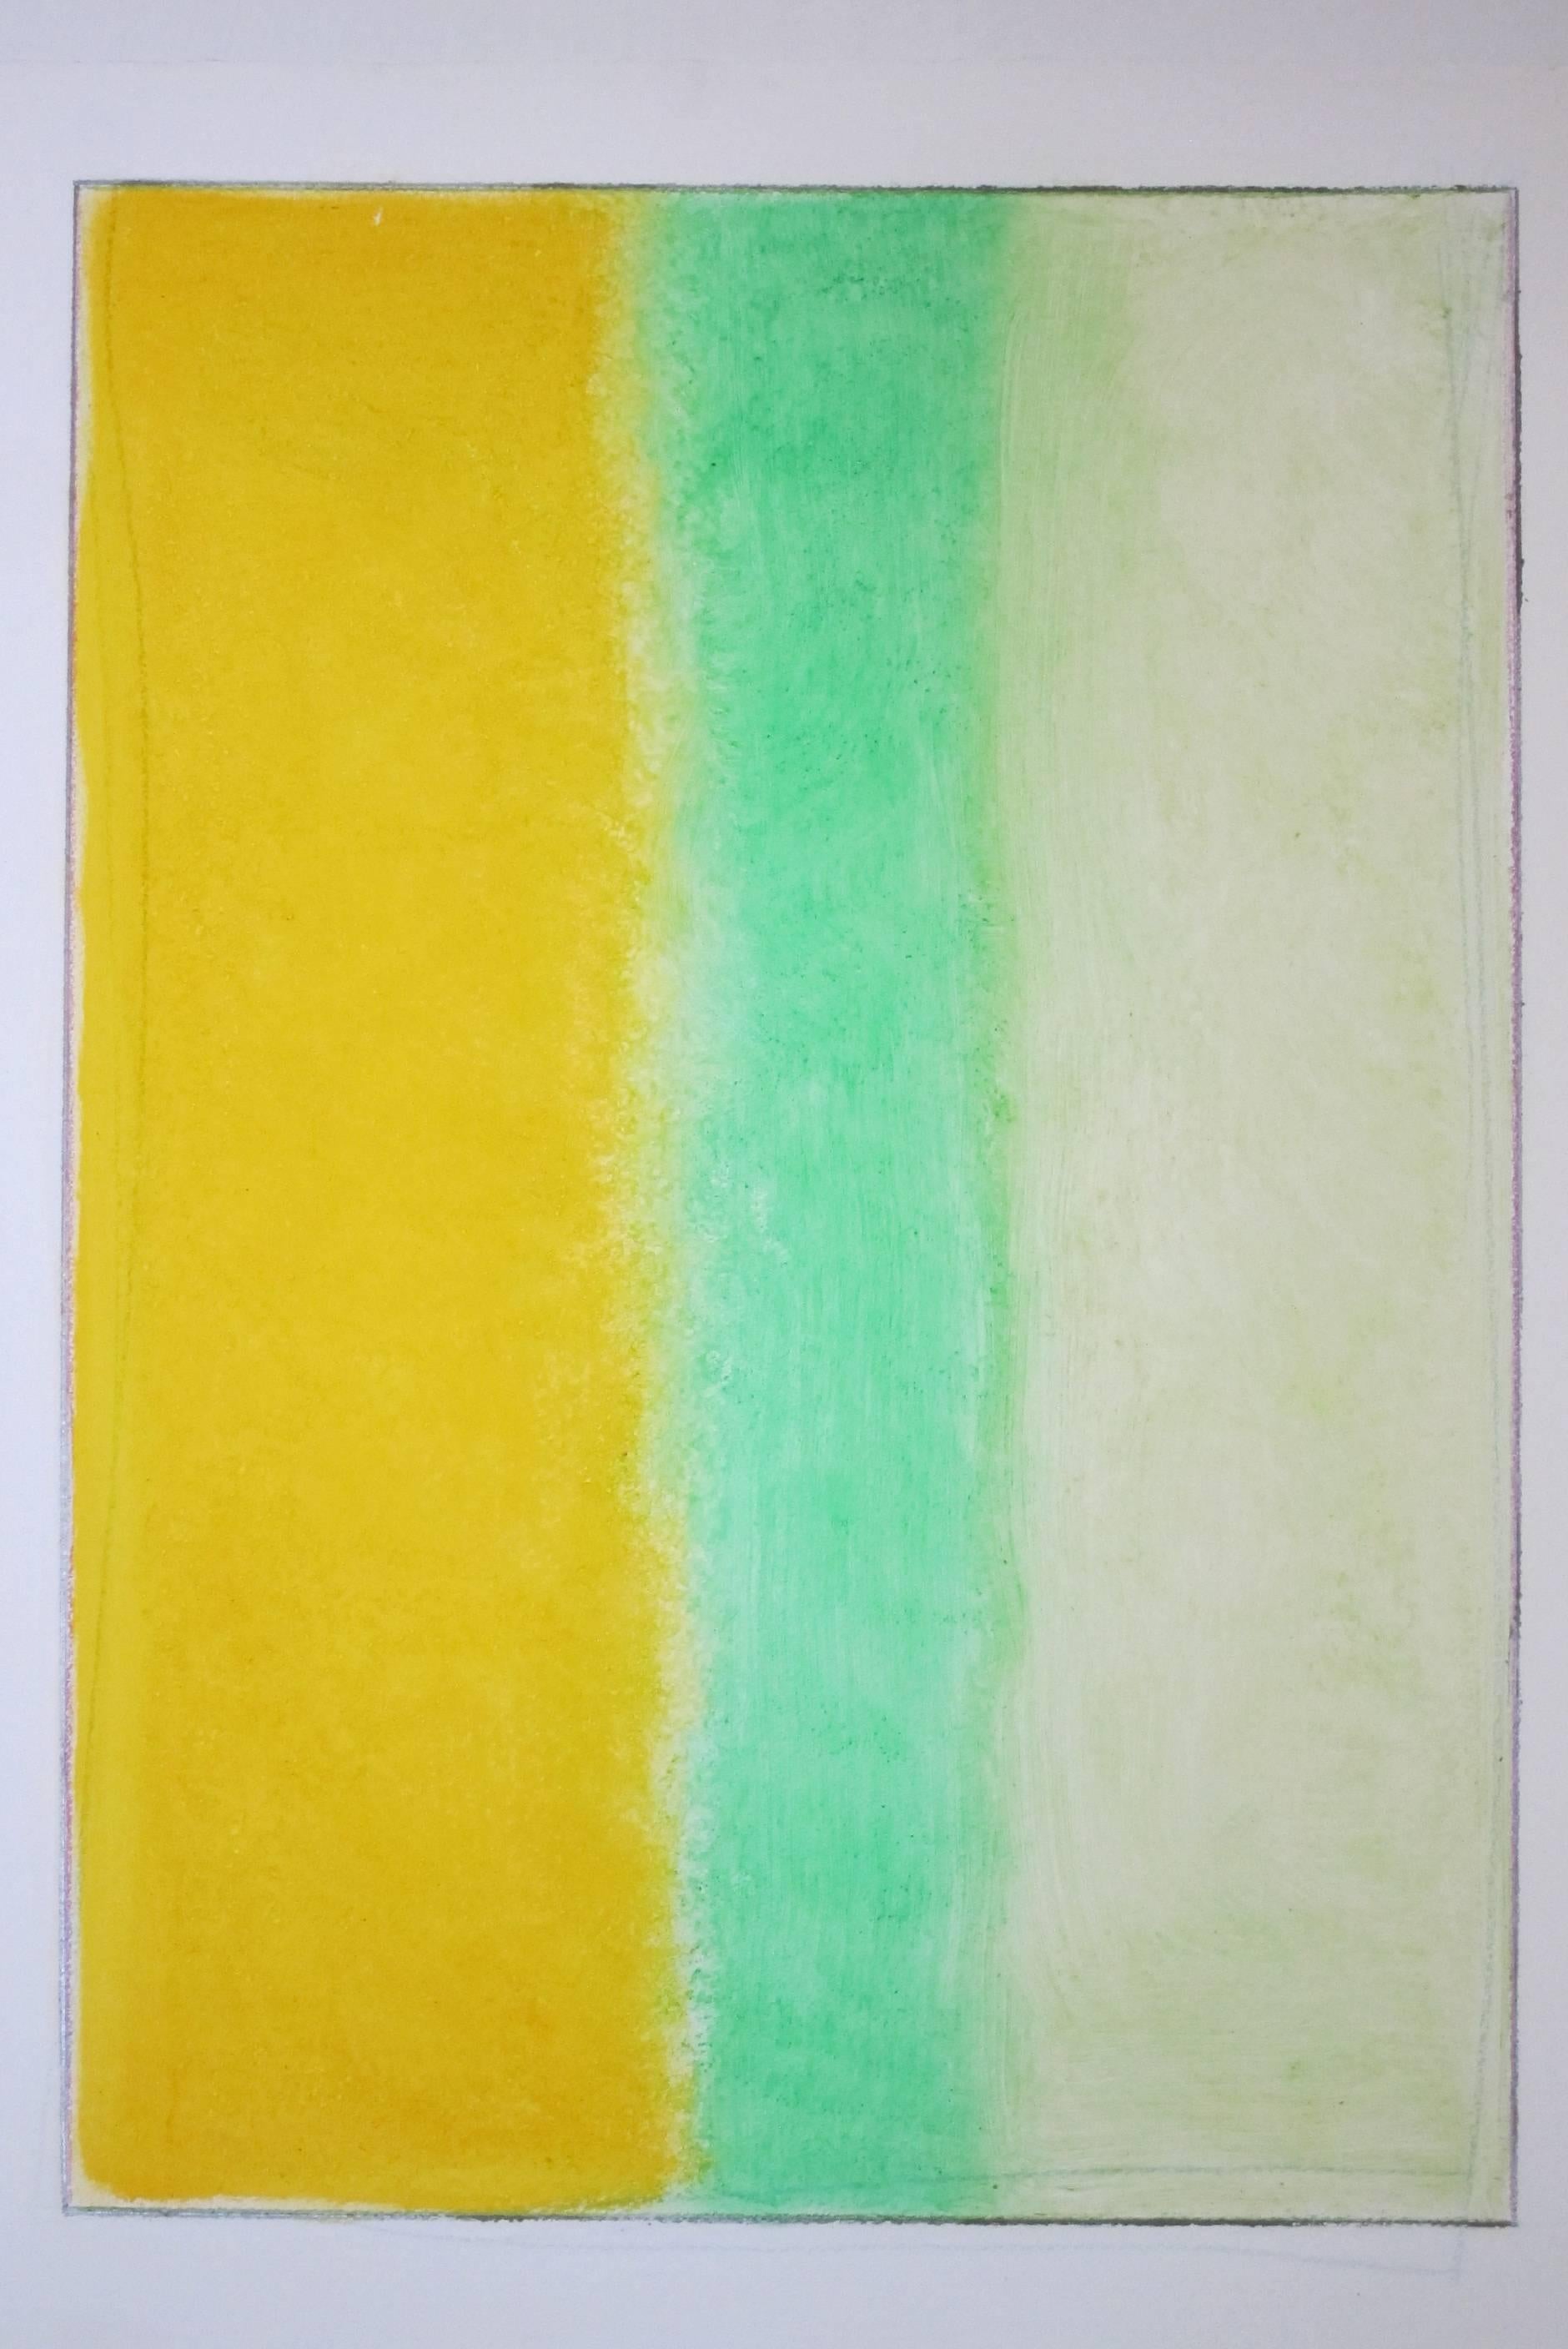 #10 April 2017 Yellow Green Abstract Original Oil Contemporary Painting on Paper